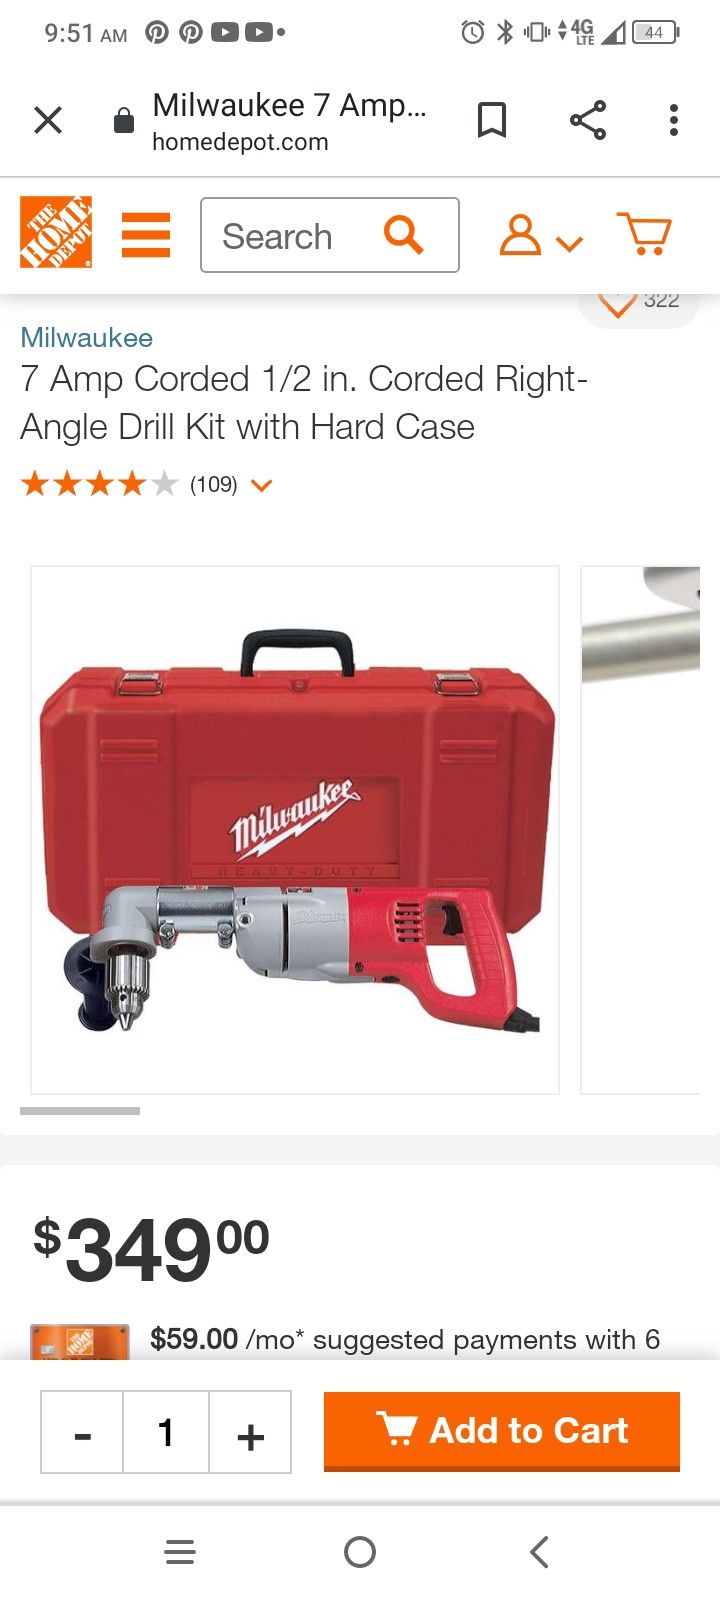 Milwaukee 7 Amp Corded 1/2 in. Corded Drill